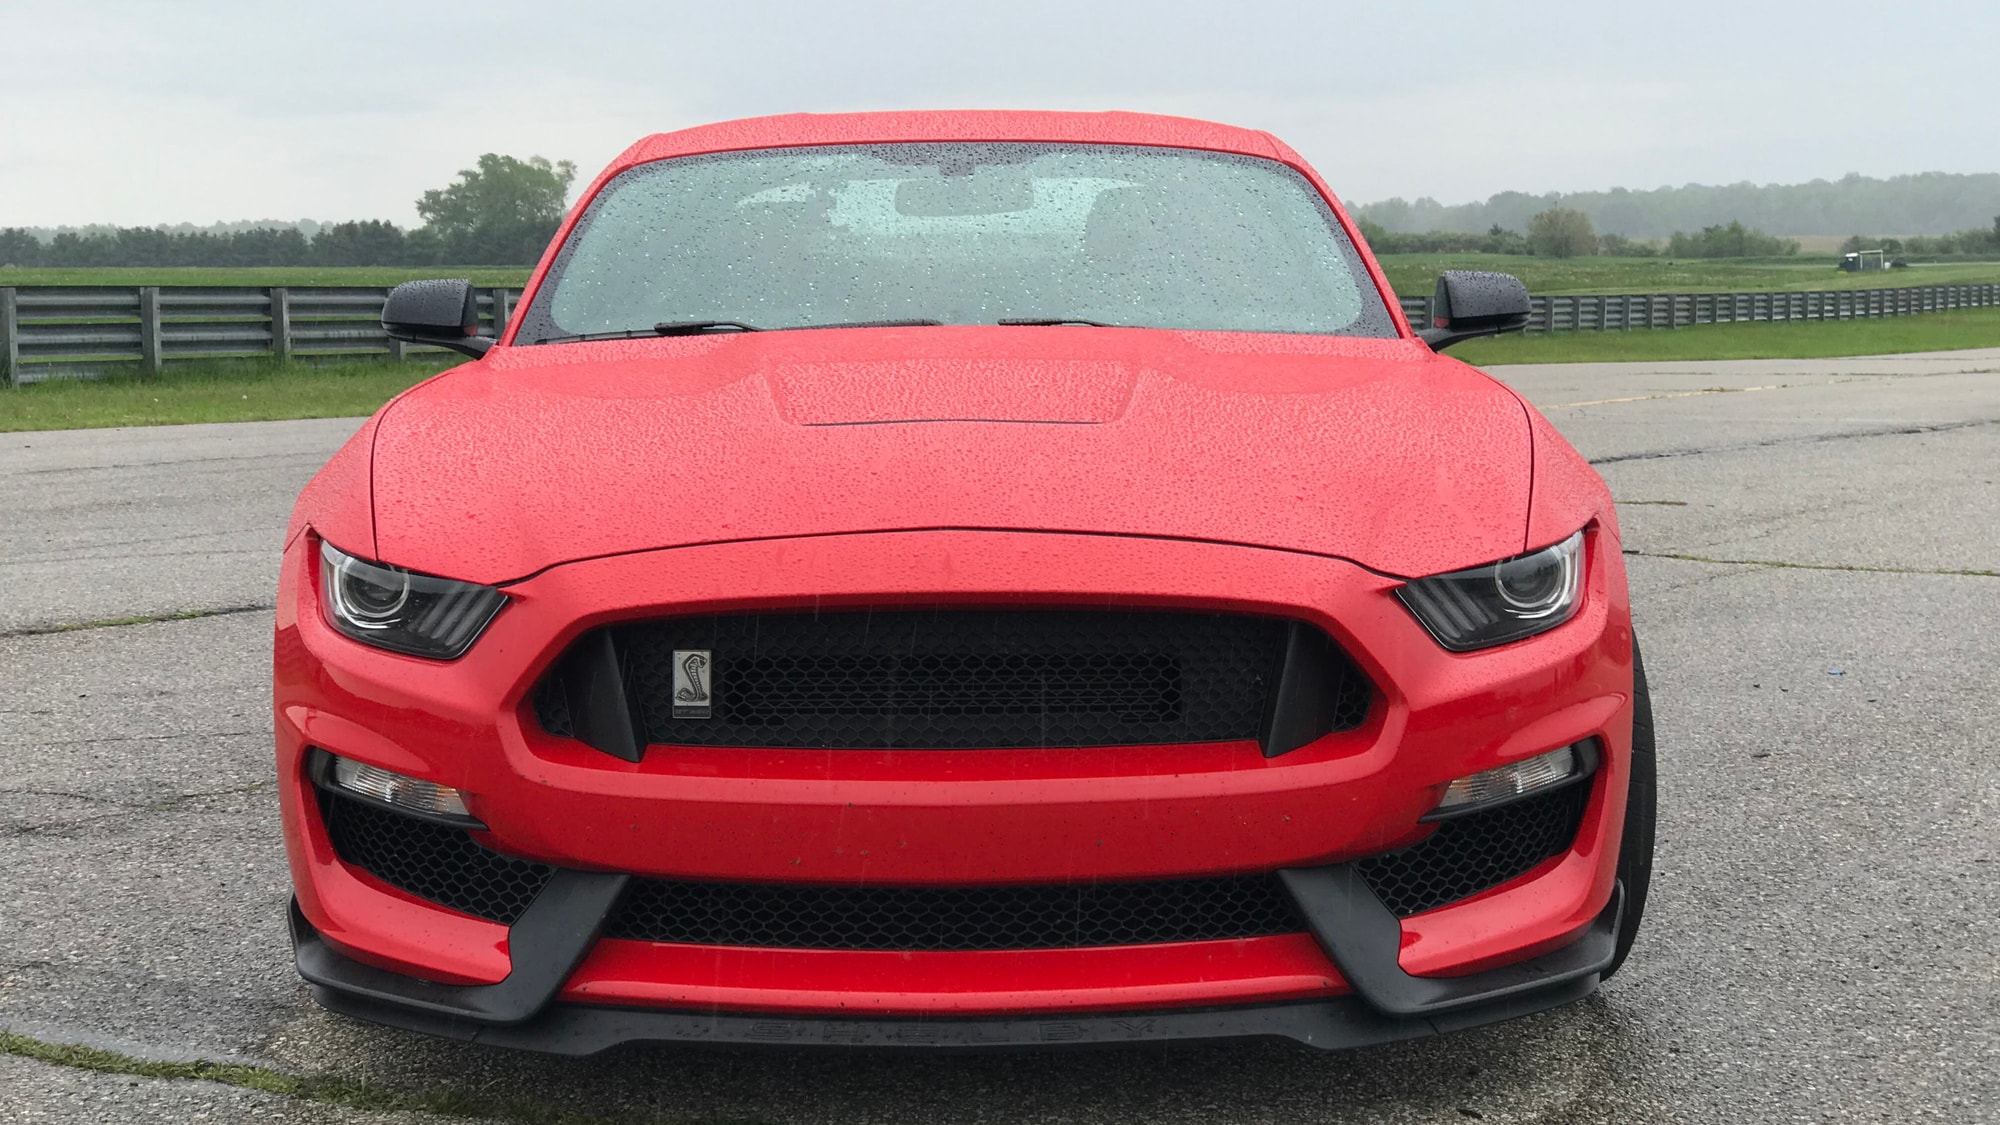 2019 Ford Mustang Shelby GT350 Gingerman Raceway track day